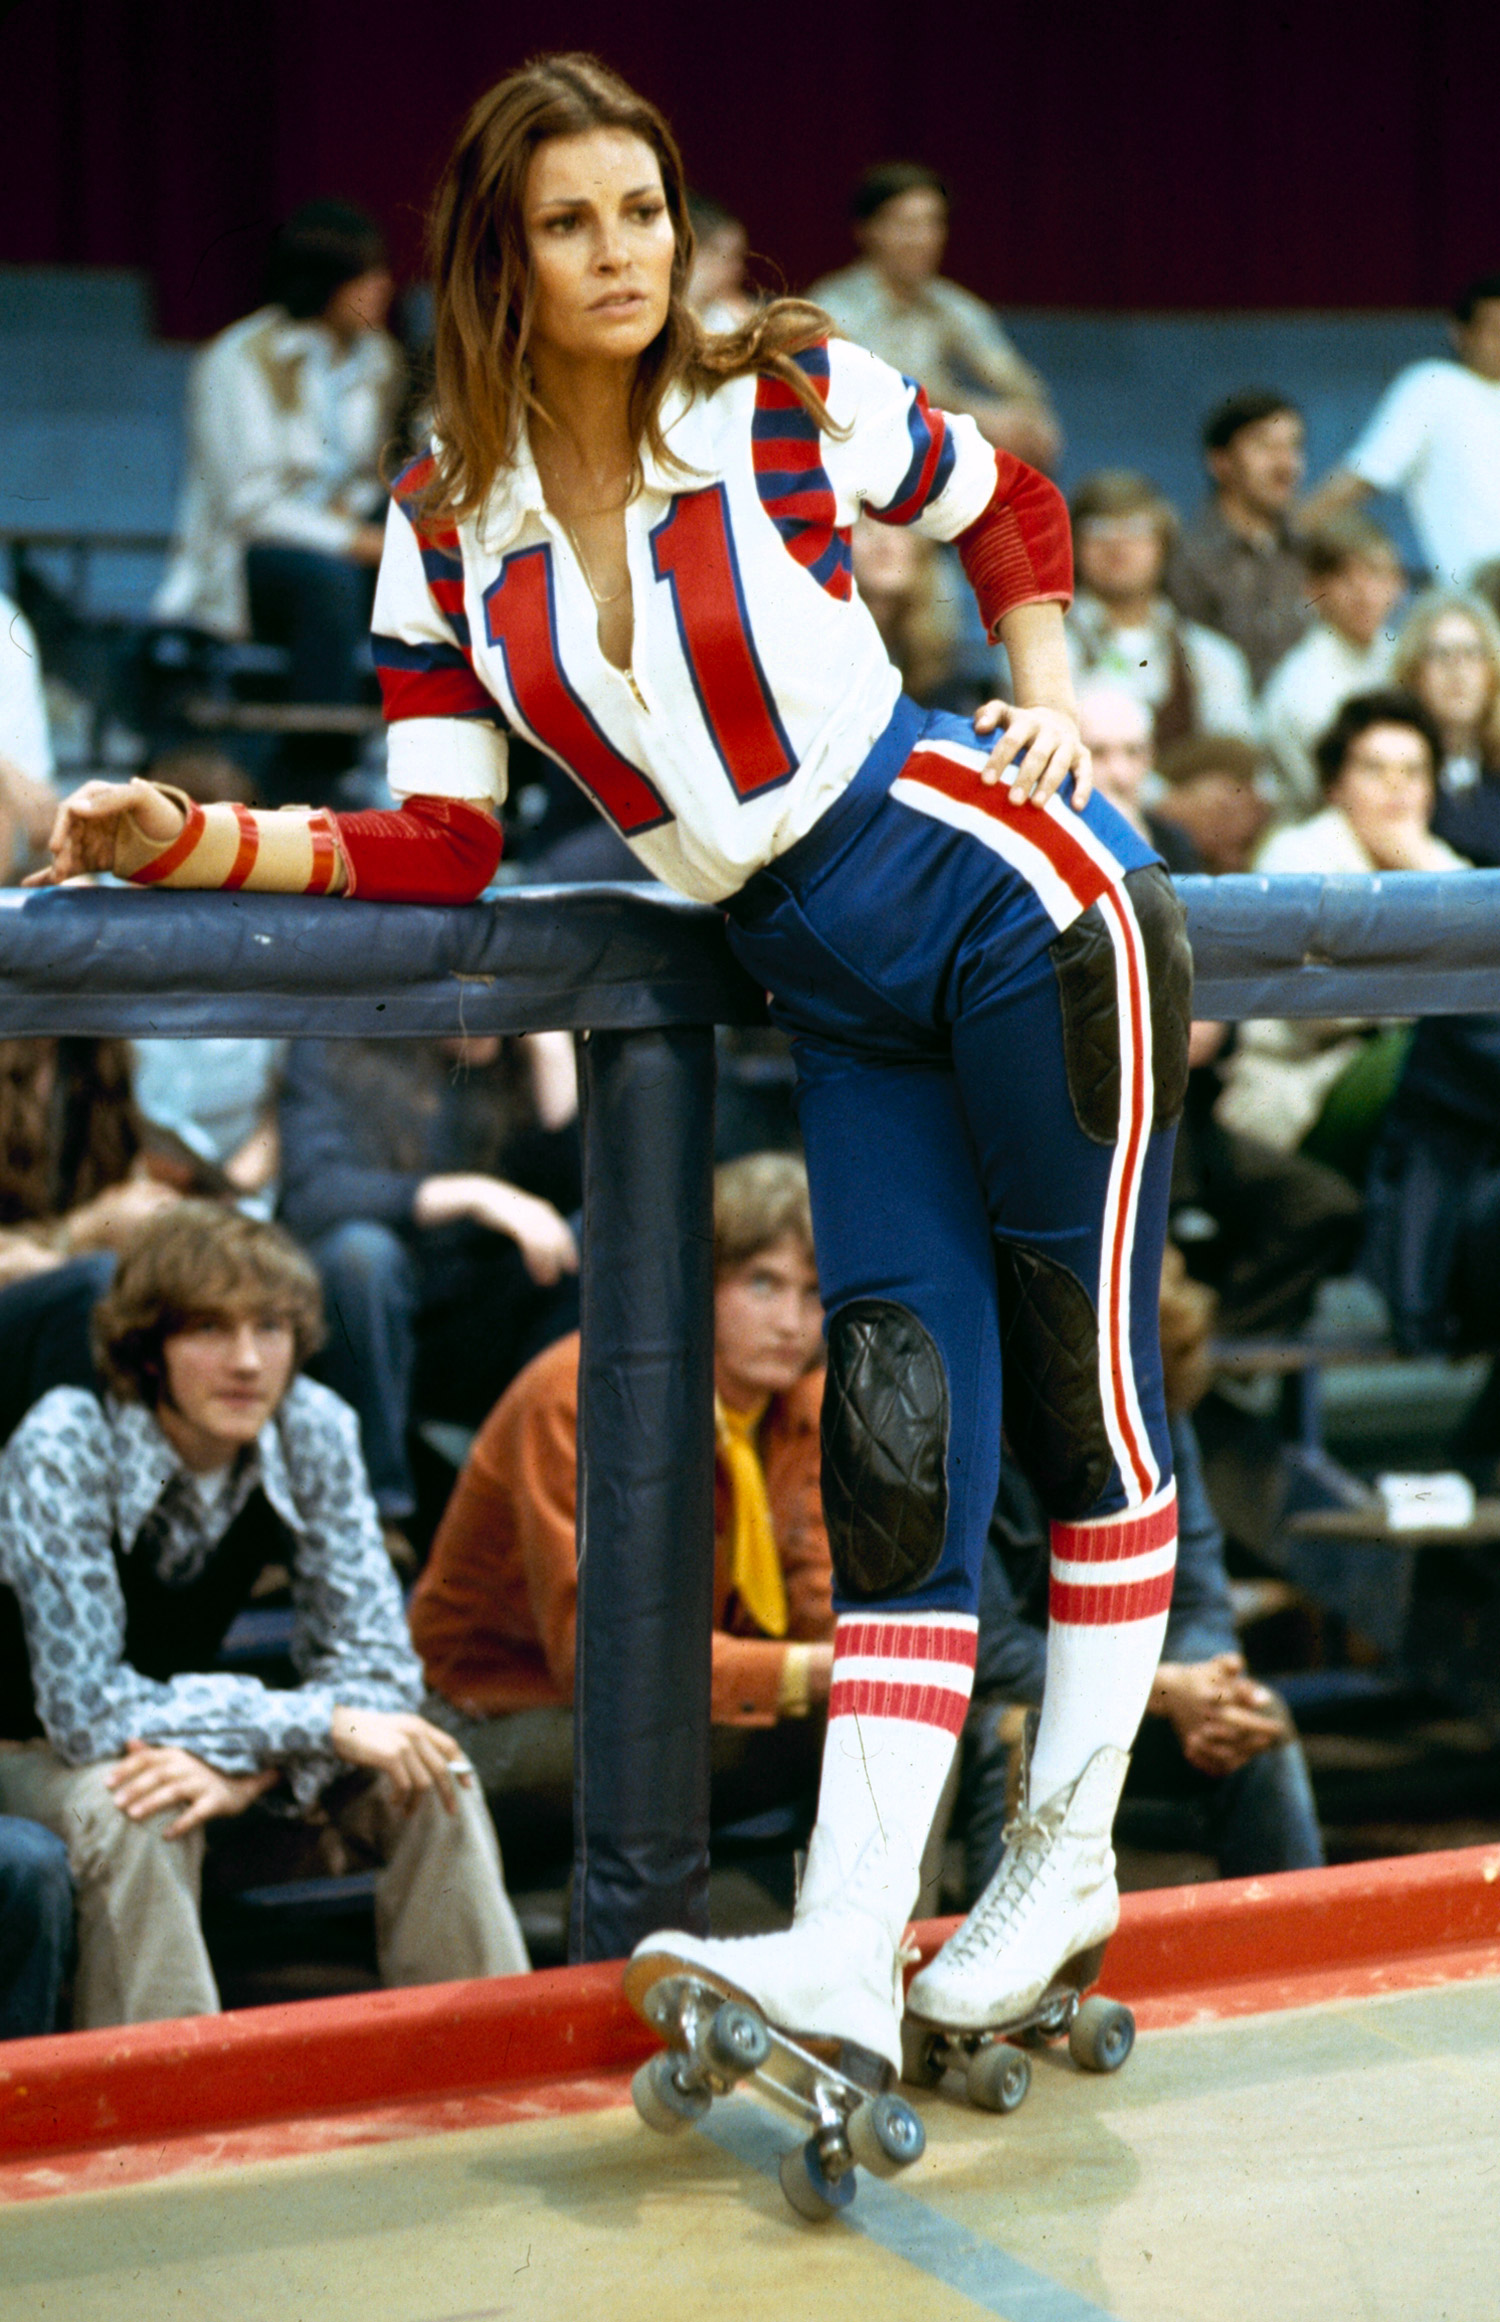 Raquel Welch in roller derby uniform during filming of motion picture "The Kansas City Bomber."